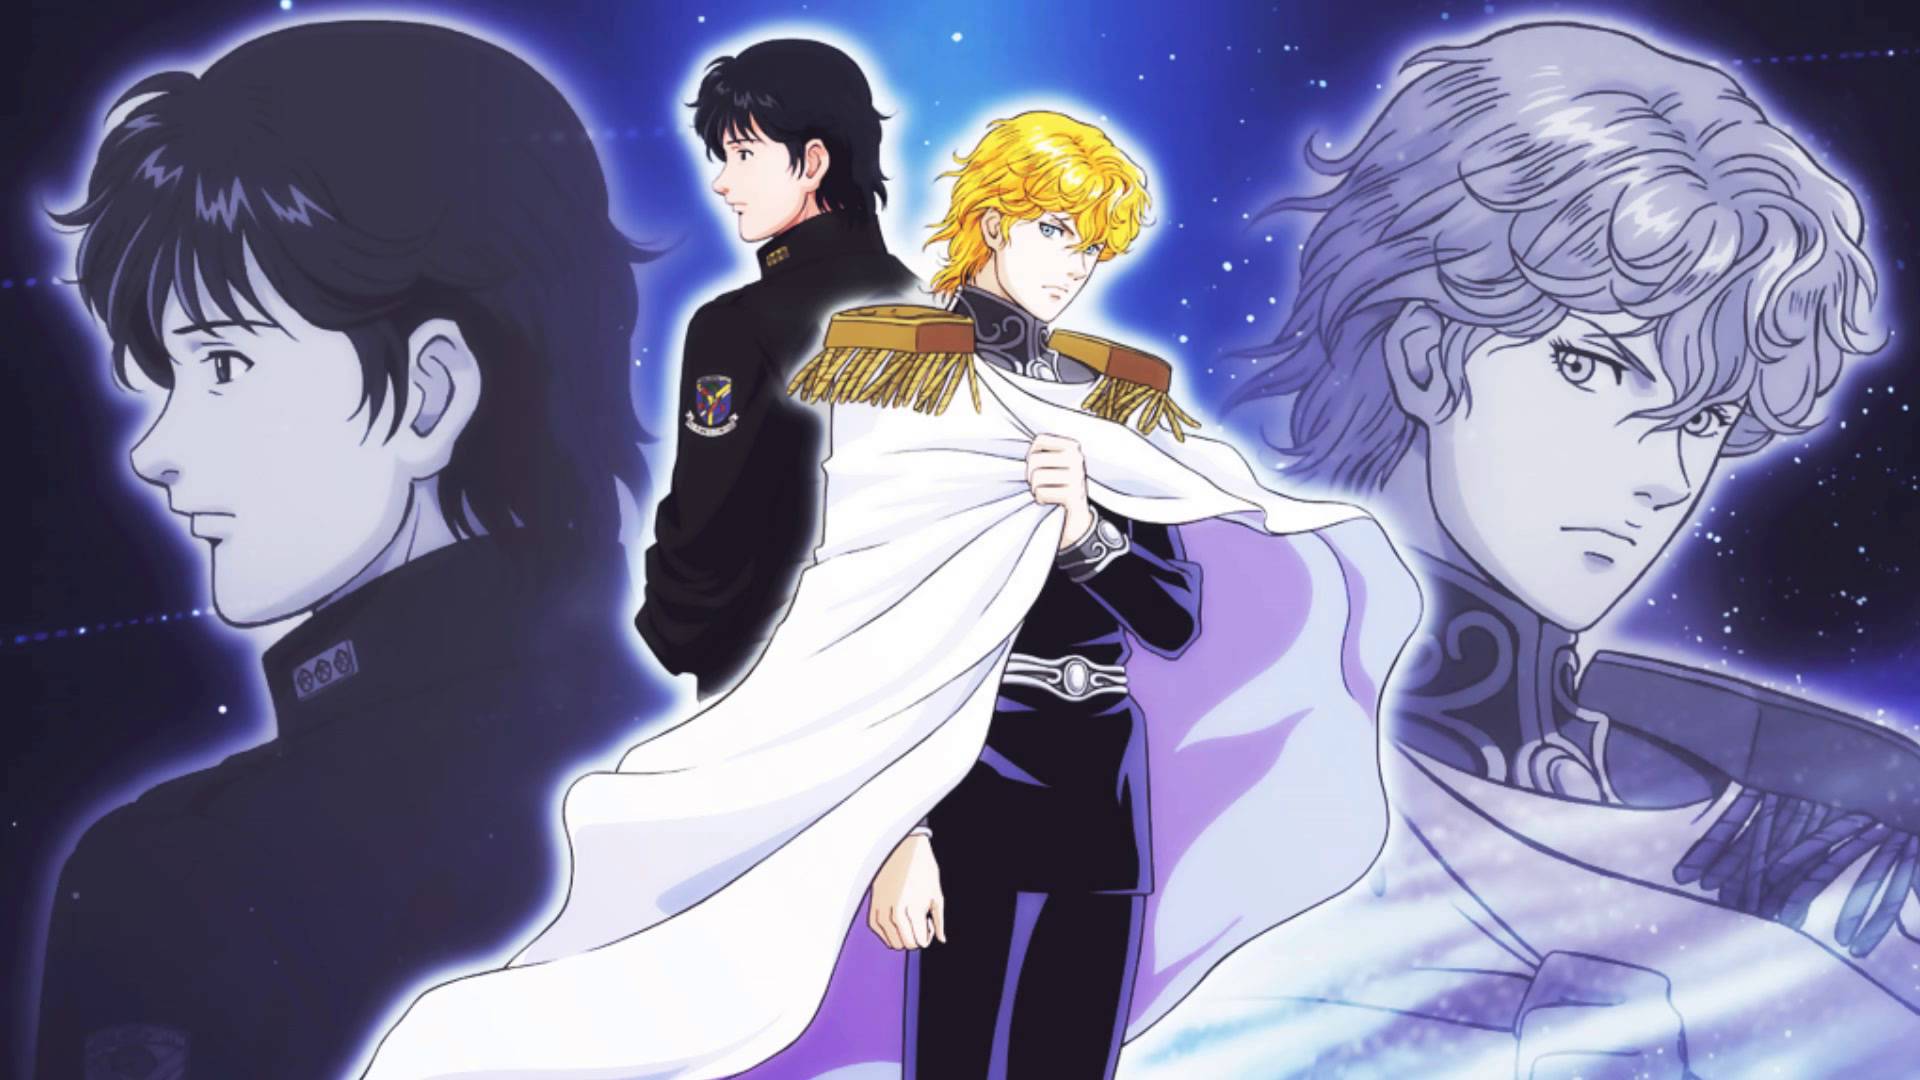 Legend of the Galactic Heroes Season 1 Review